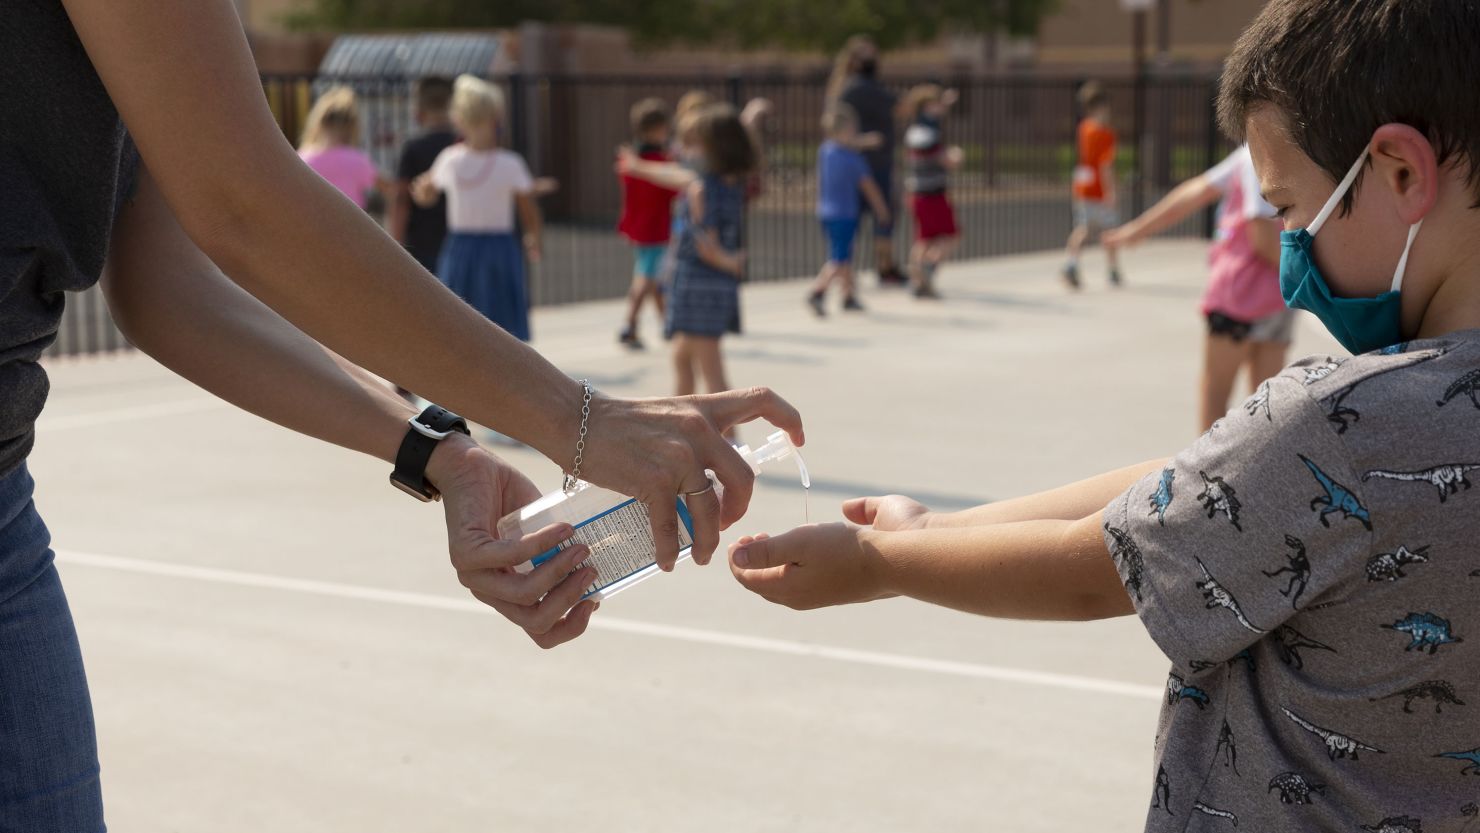 A teacher sprays hand sanitizer on a student's hands at an elementary school in Surprise, Arizona, on Aug. 20, 2020. The FDA is warning consumers about misleading packaging of hand sanitizers that look like food or drink.